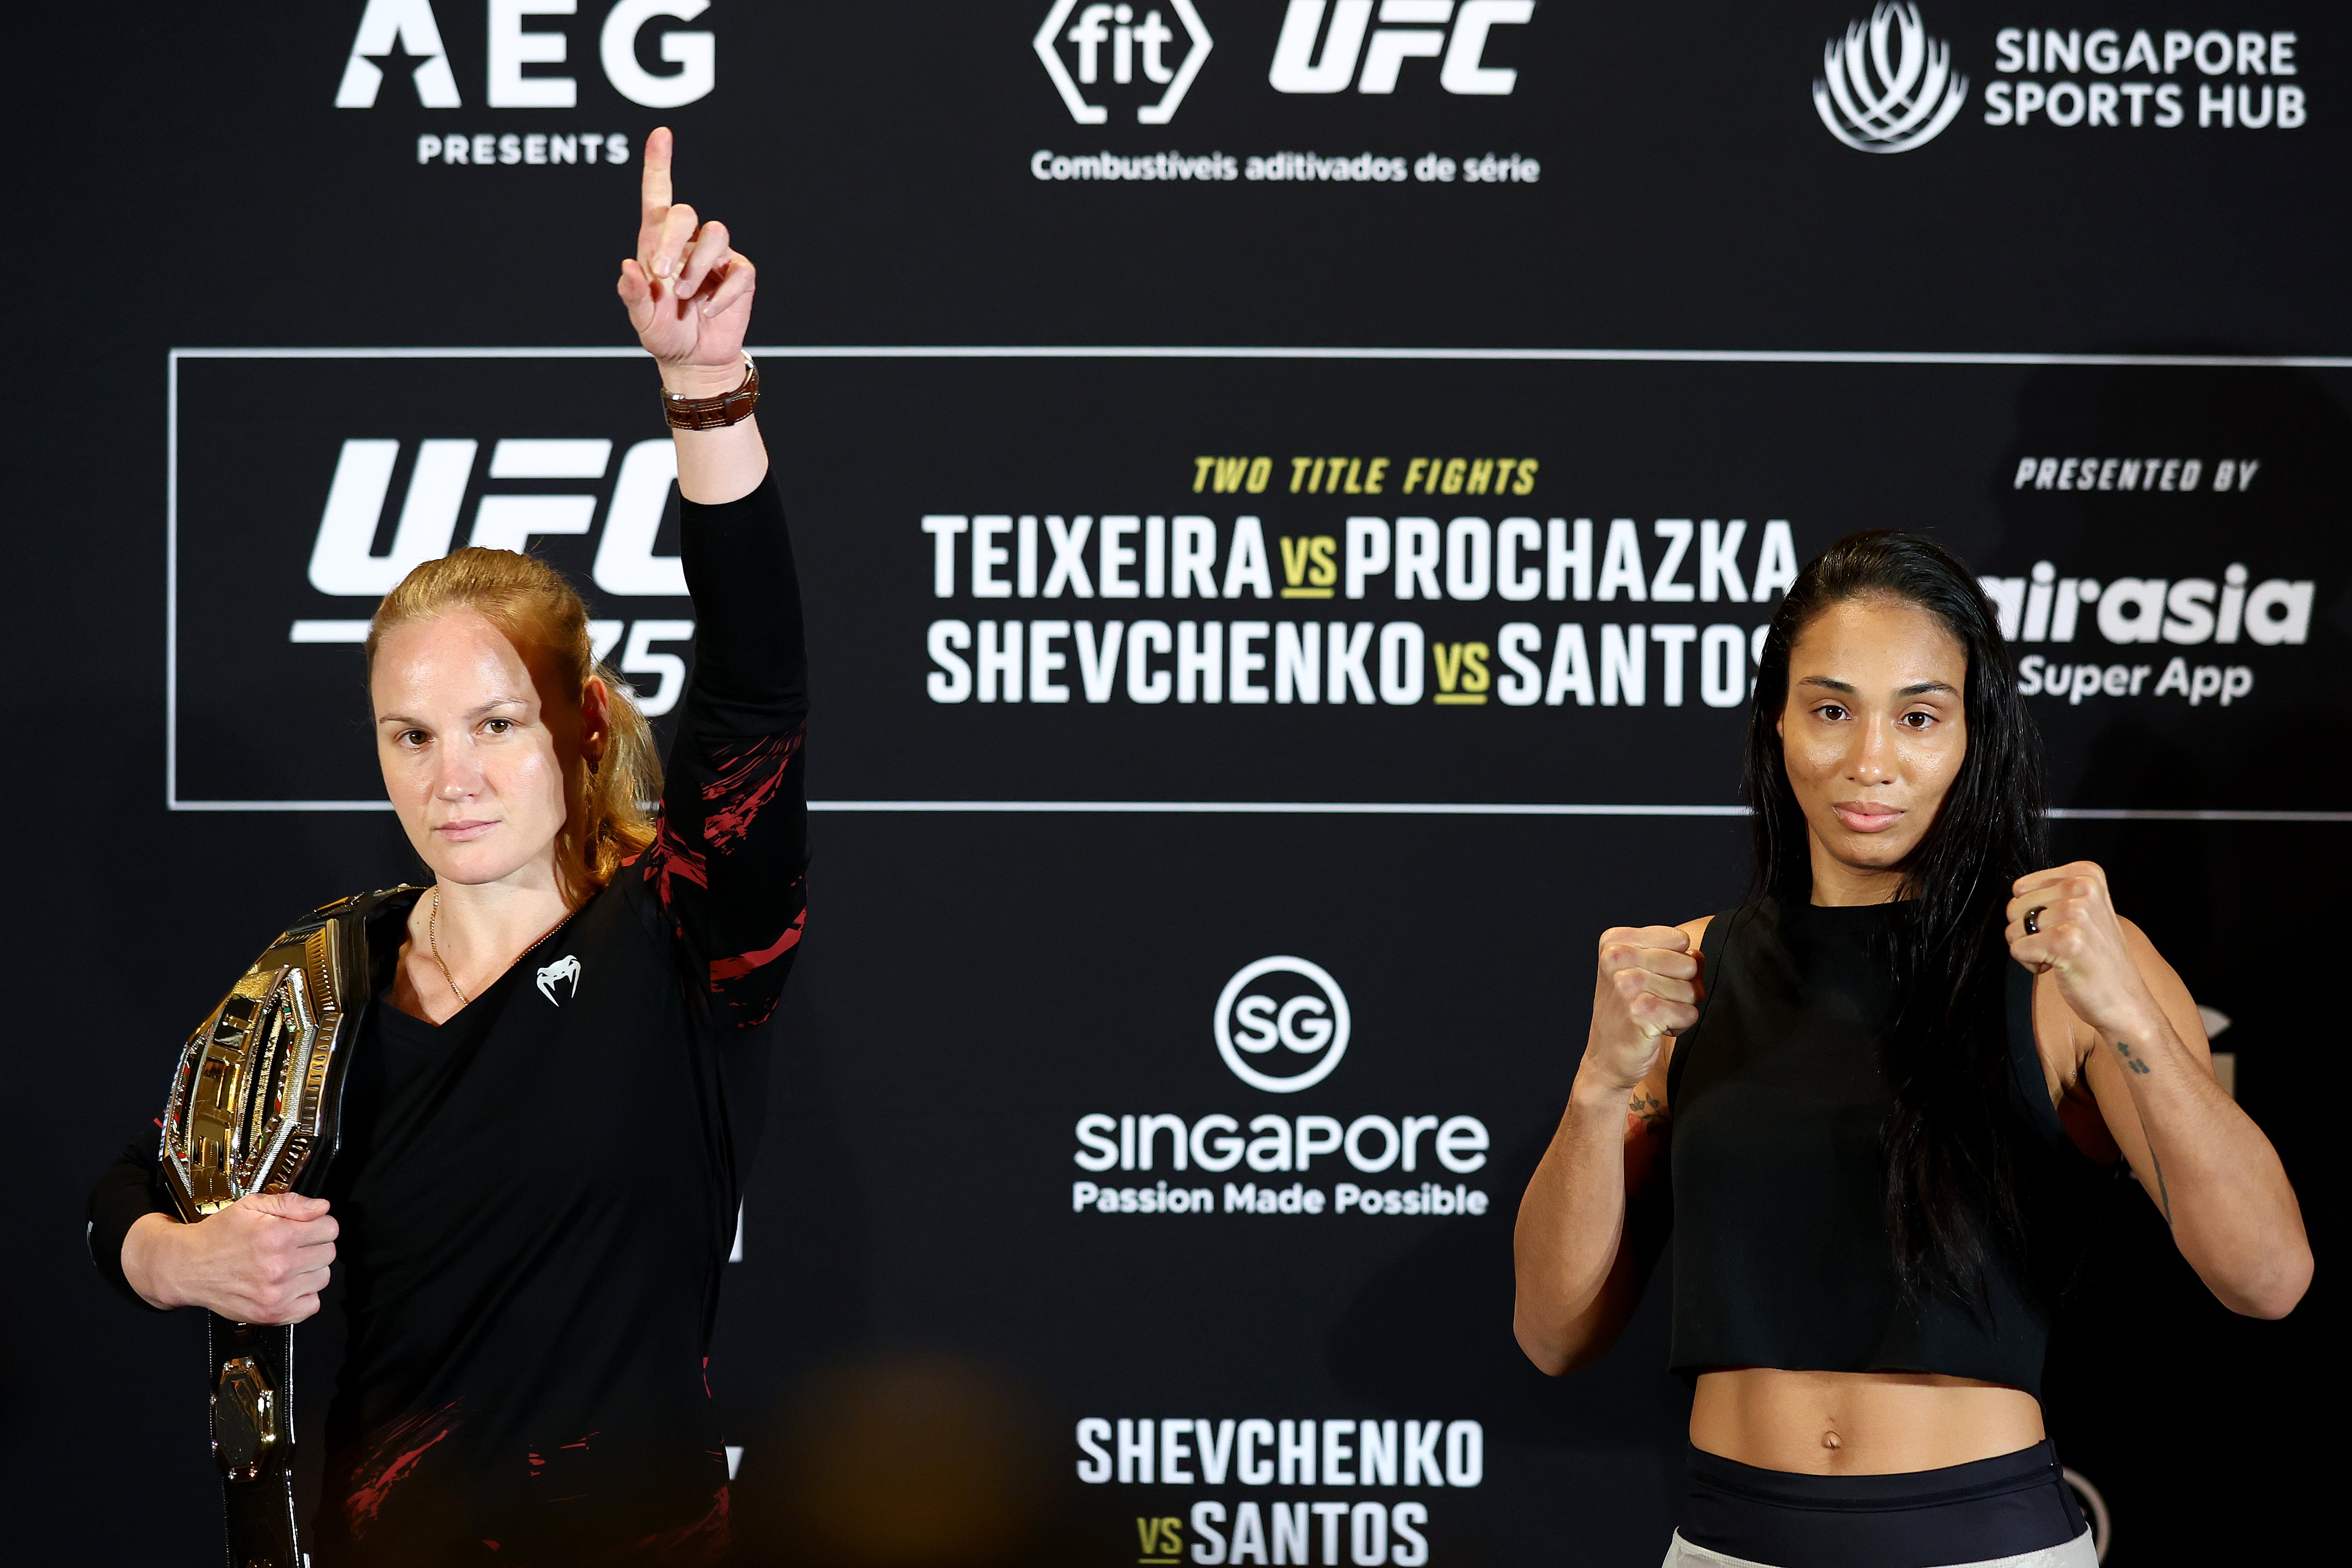 Shevchenko is seeking a seventh straight successful title defence